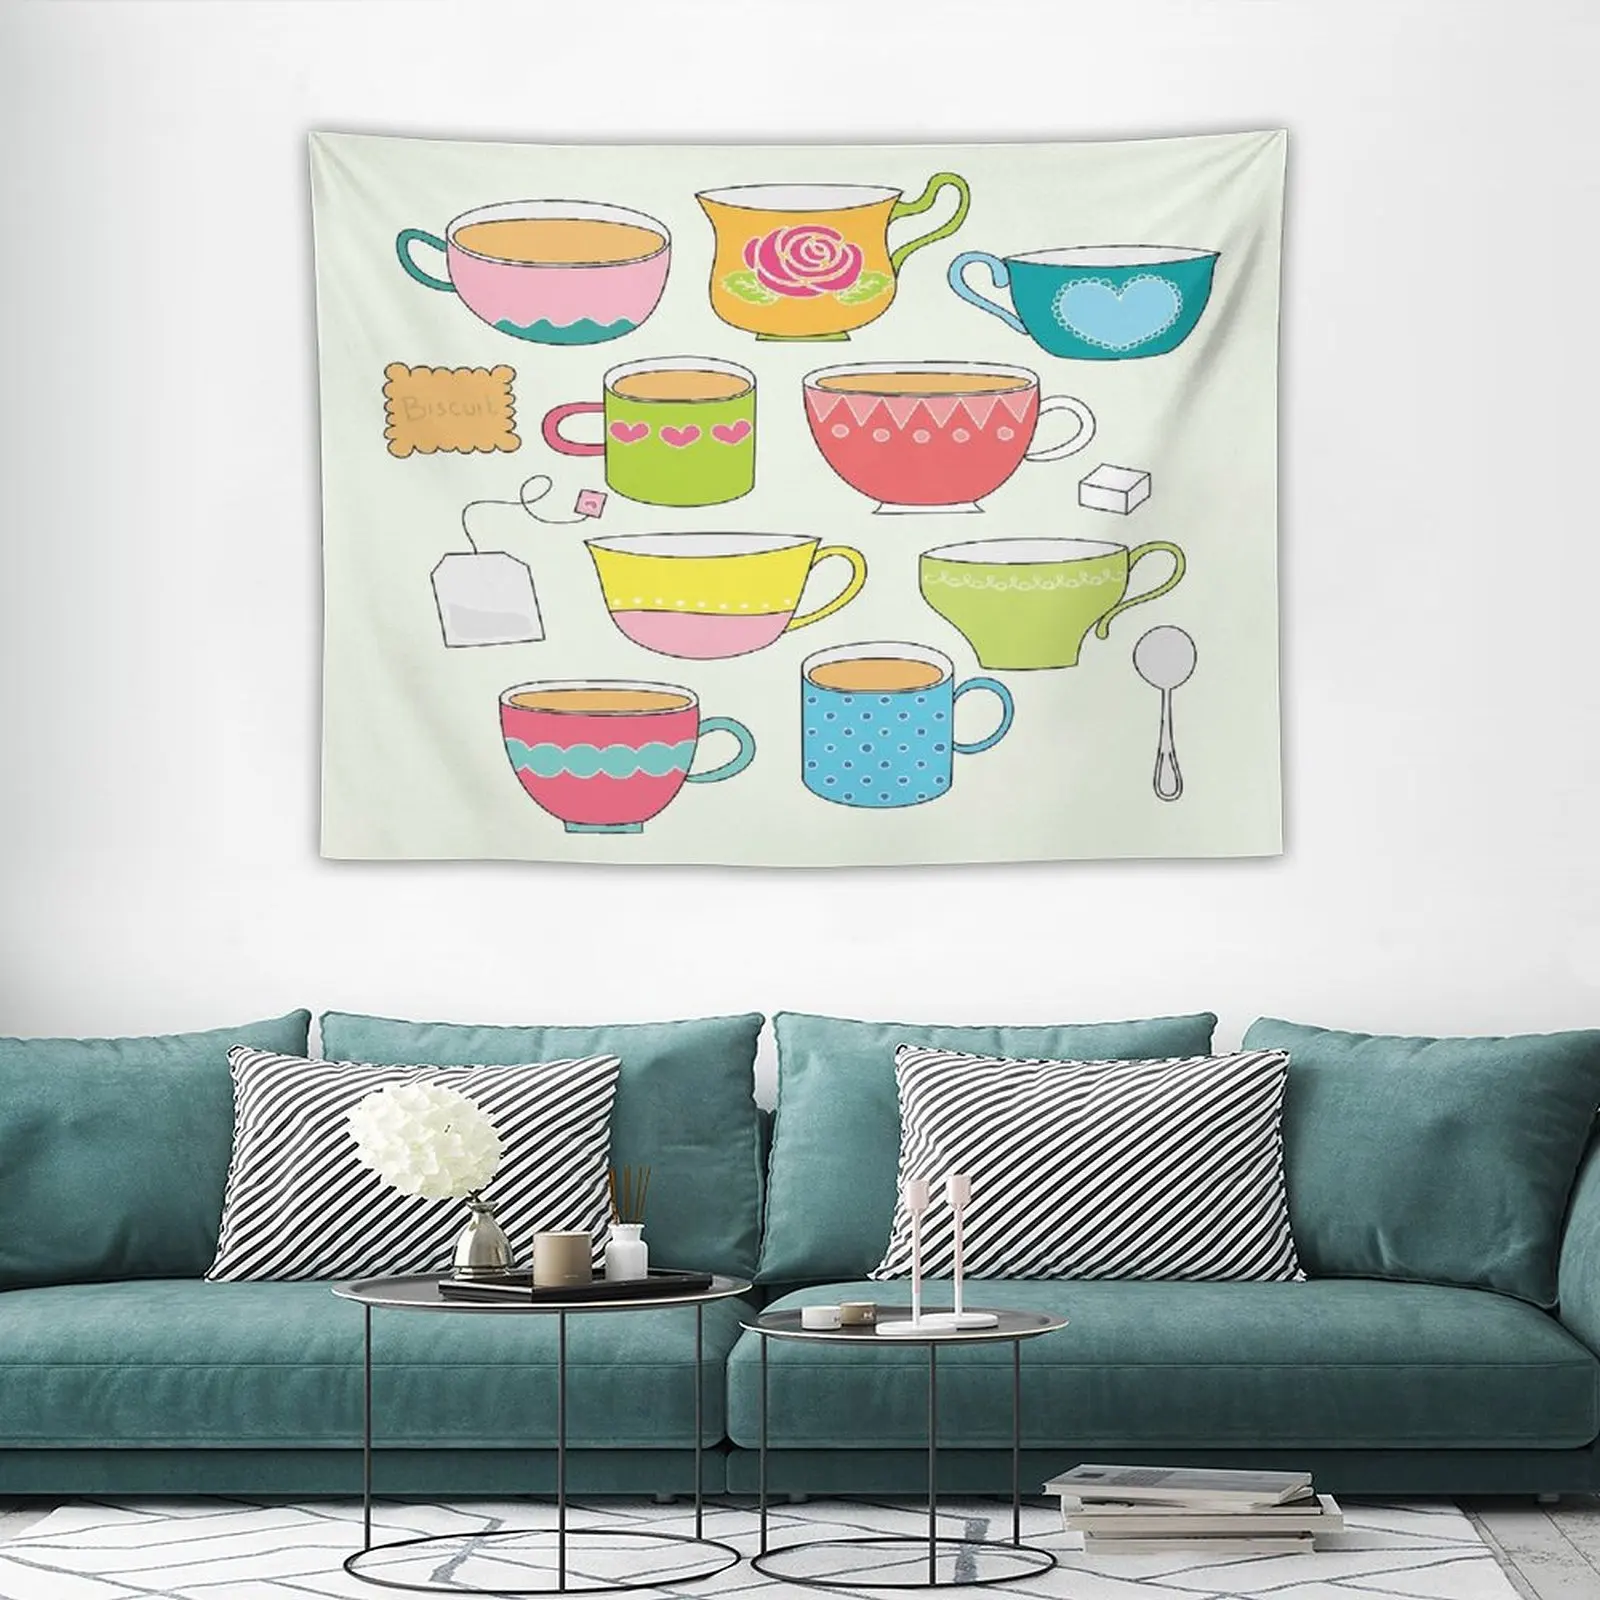 

Tea Time Tapestry Wall Decoration Items Home Decor Wall Hanging Decor Anime Bedroom Deco